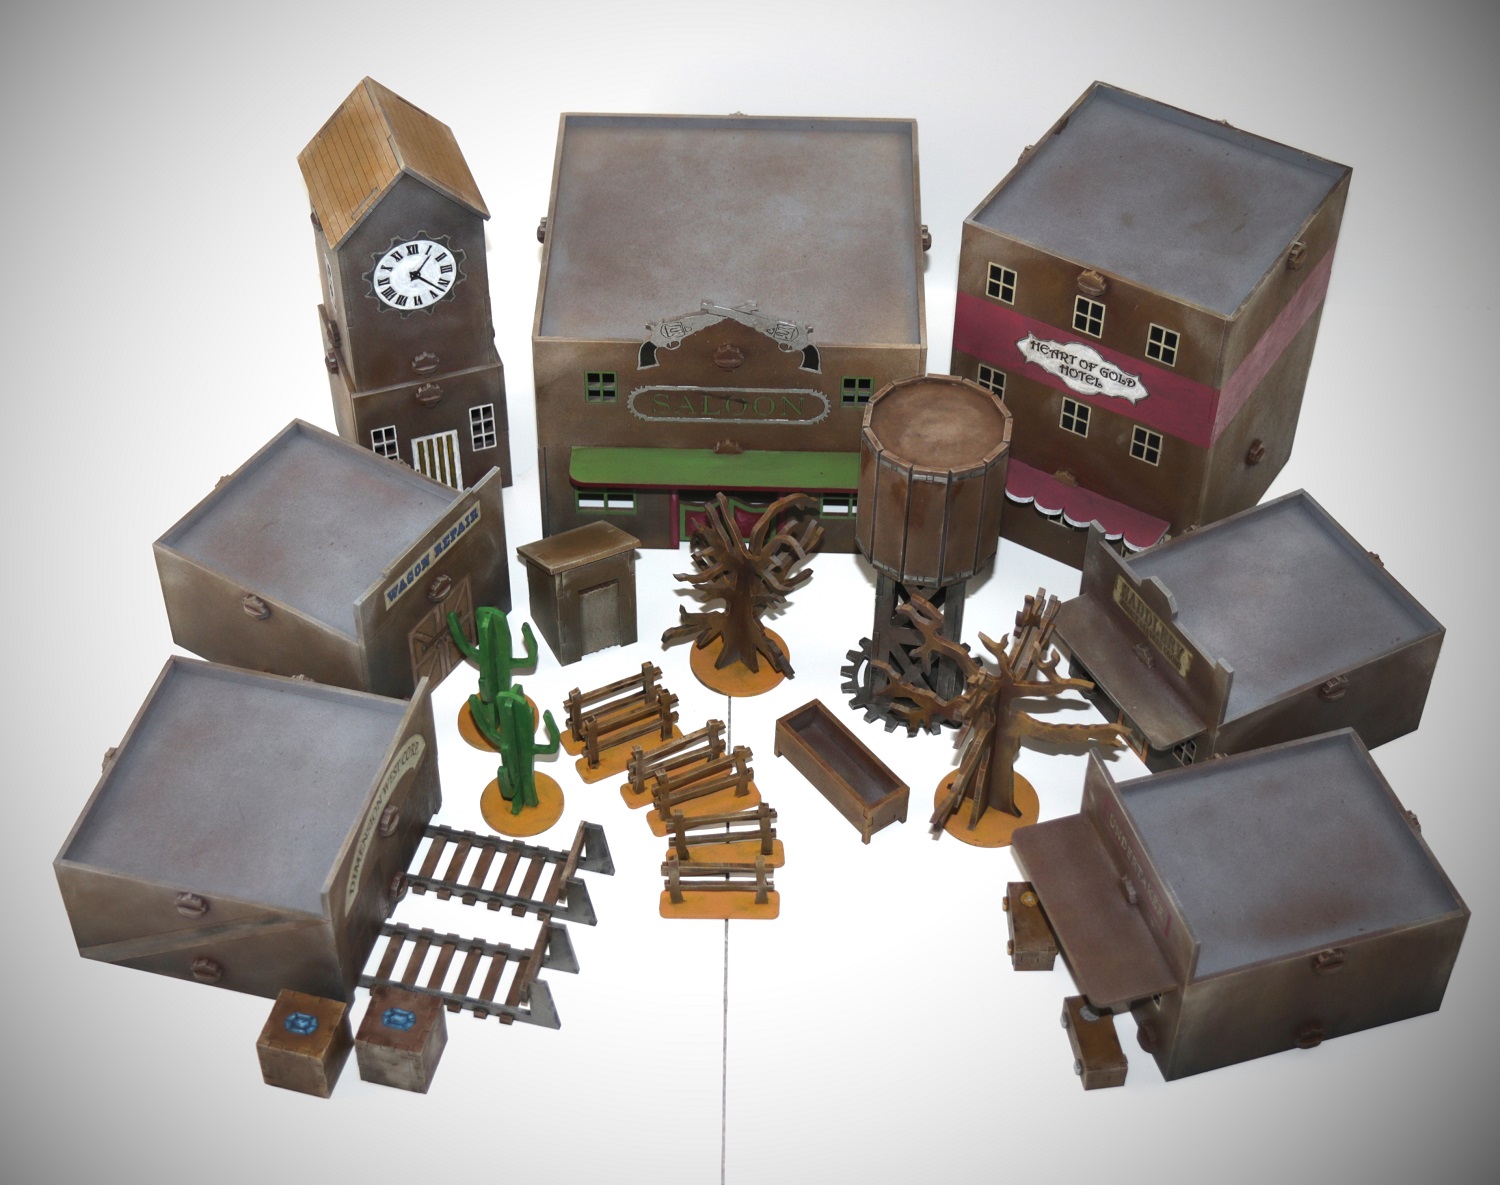 red-beam-designs-sets-up-a-collapsible-wild-west-terrain-kit-ontabletop-home-of-beasts-of-war